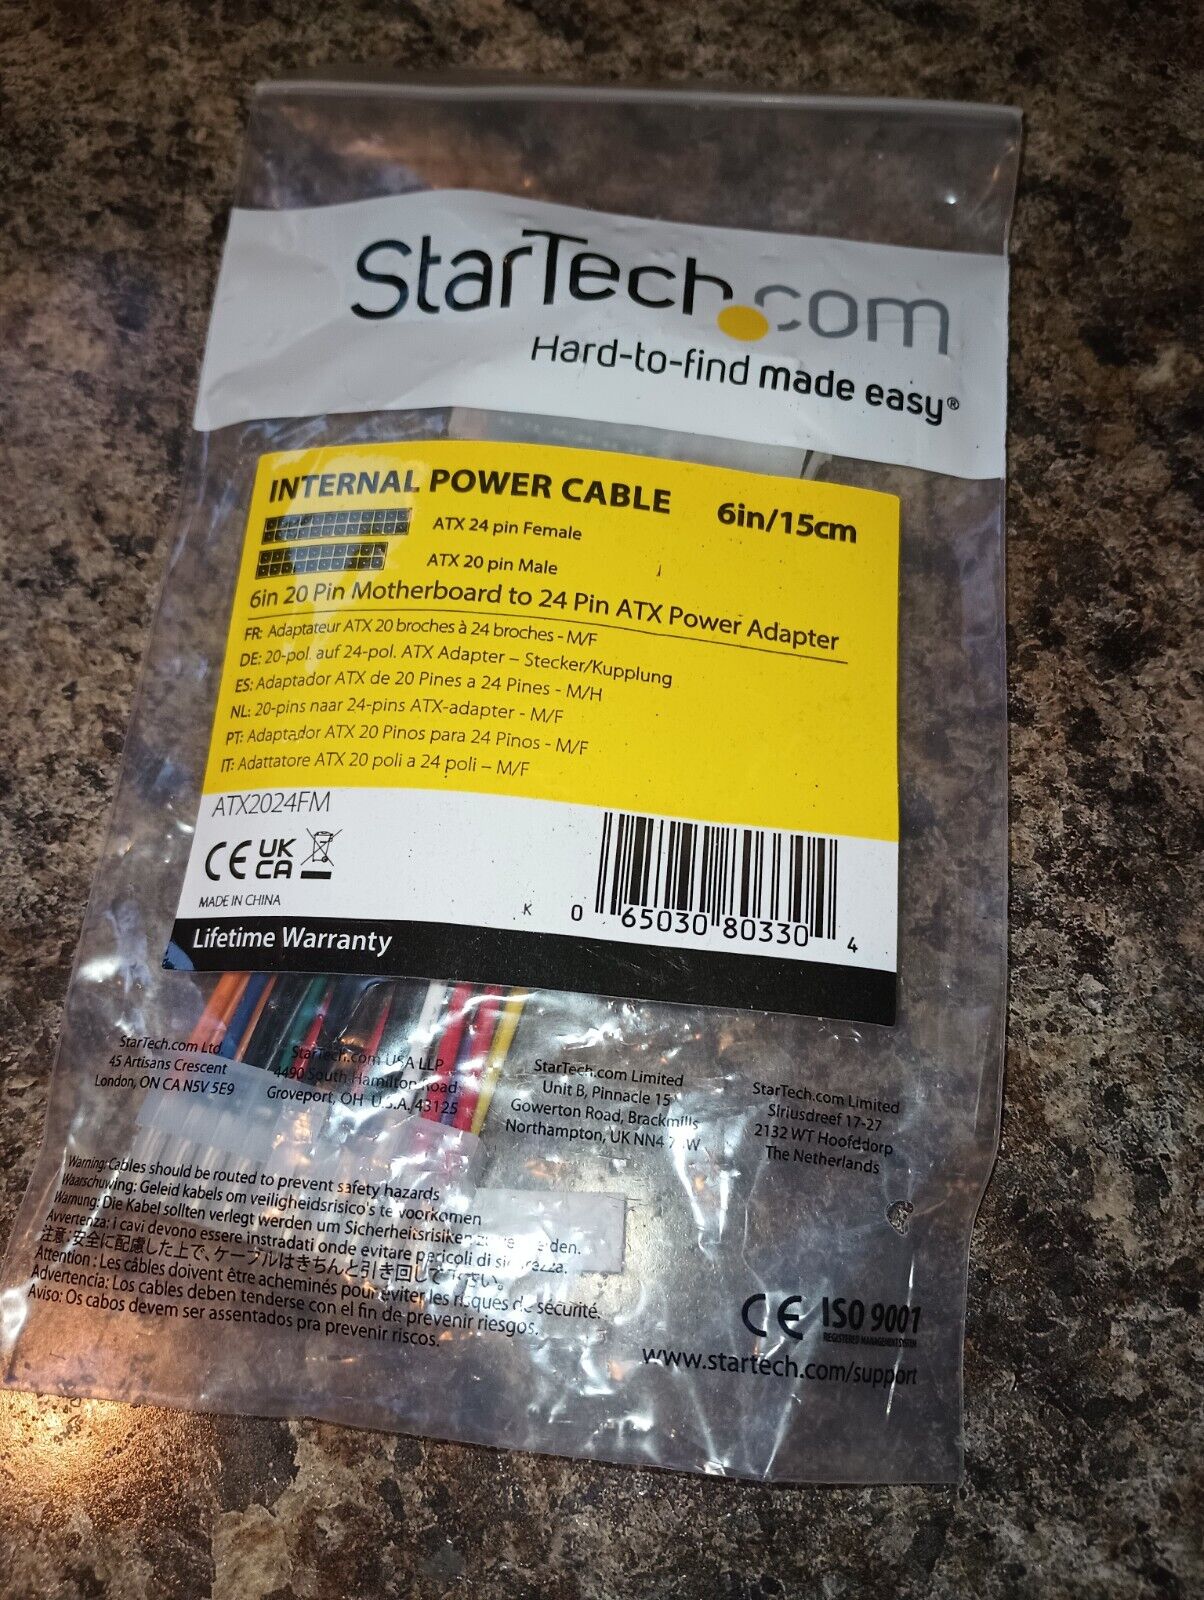 NEW - StarTech 6in 20 Pin Motherboard to 24 Pin ATX Power Adapter M/F Cable